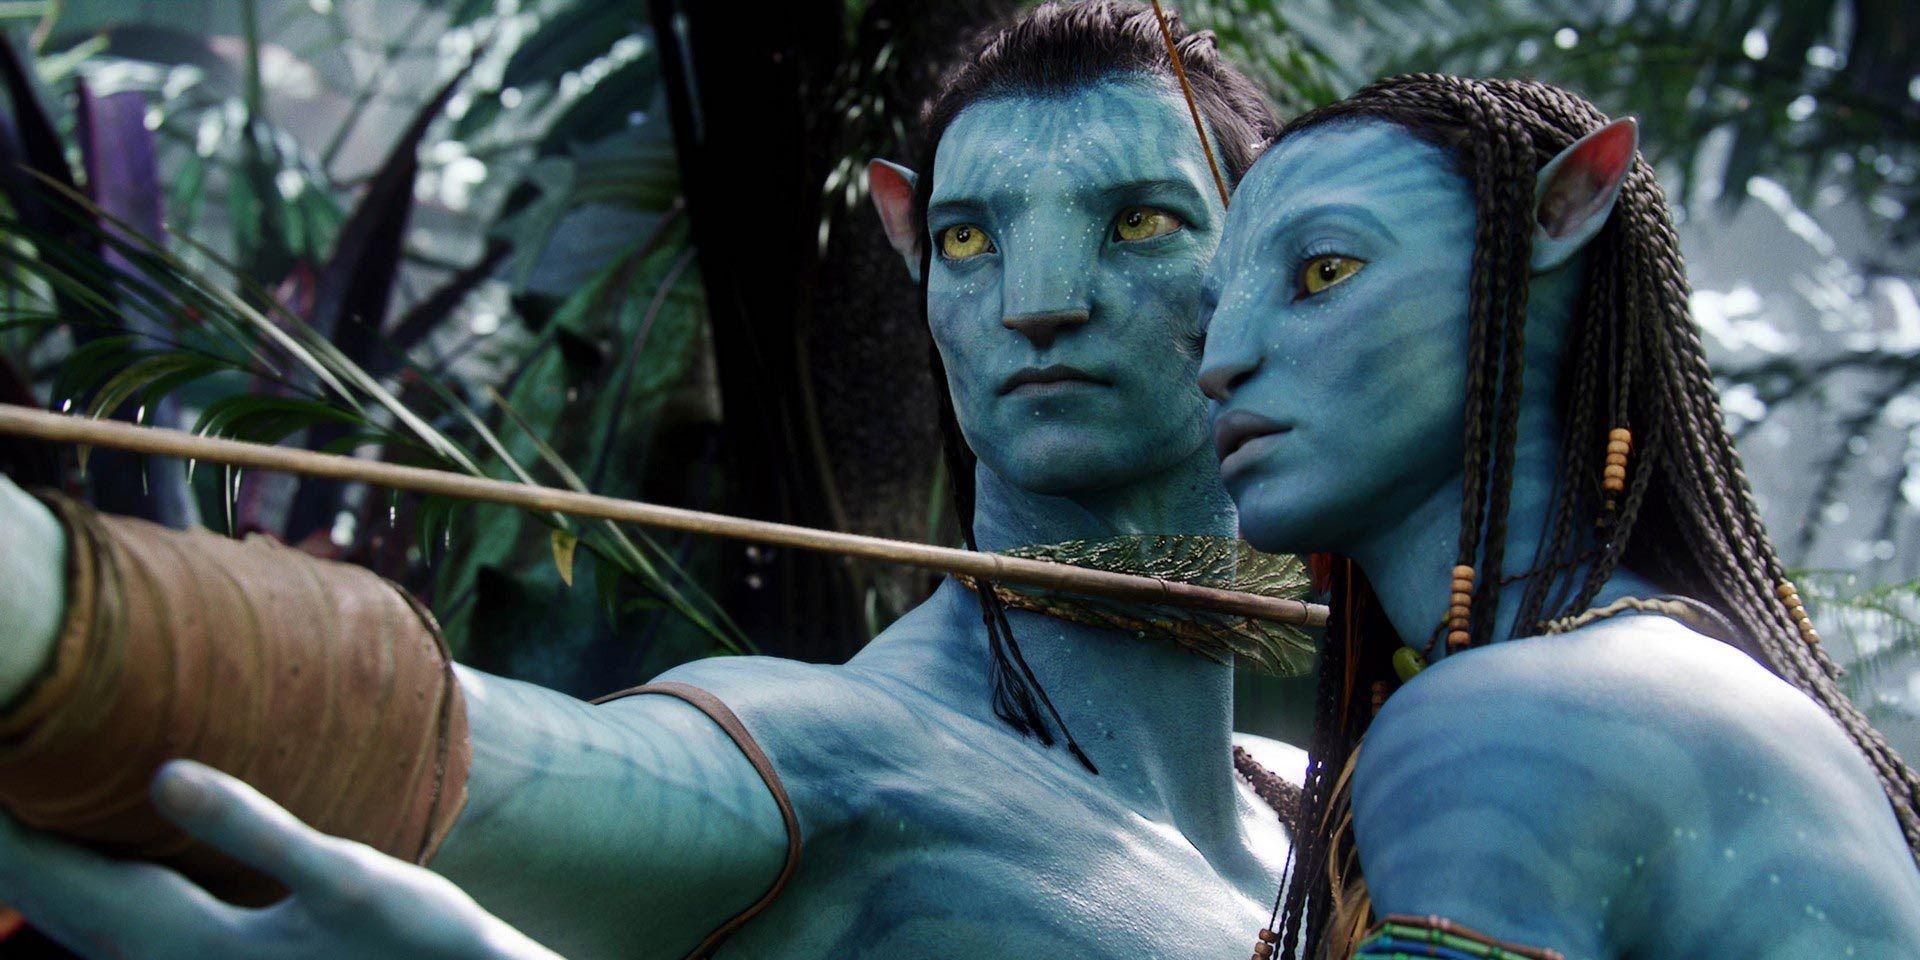 Jake and Neytiri using a bow and arrow in Avatar